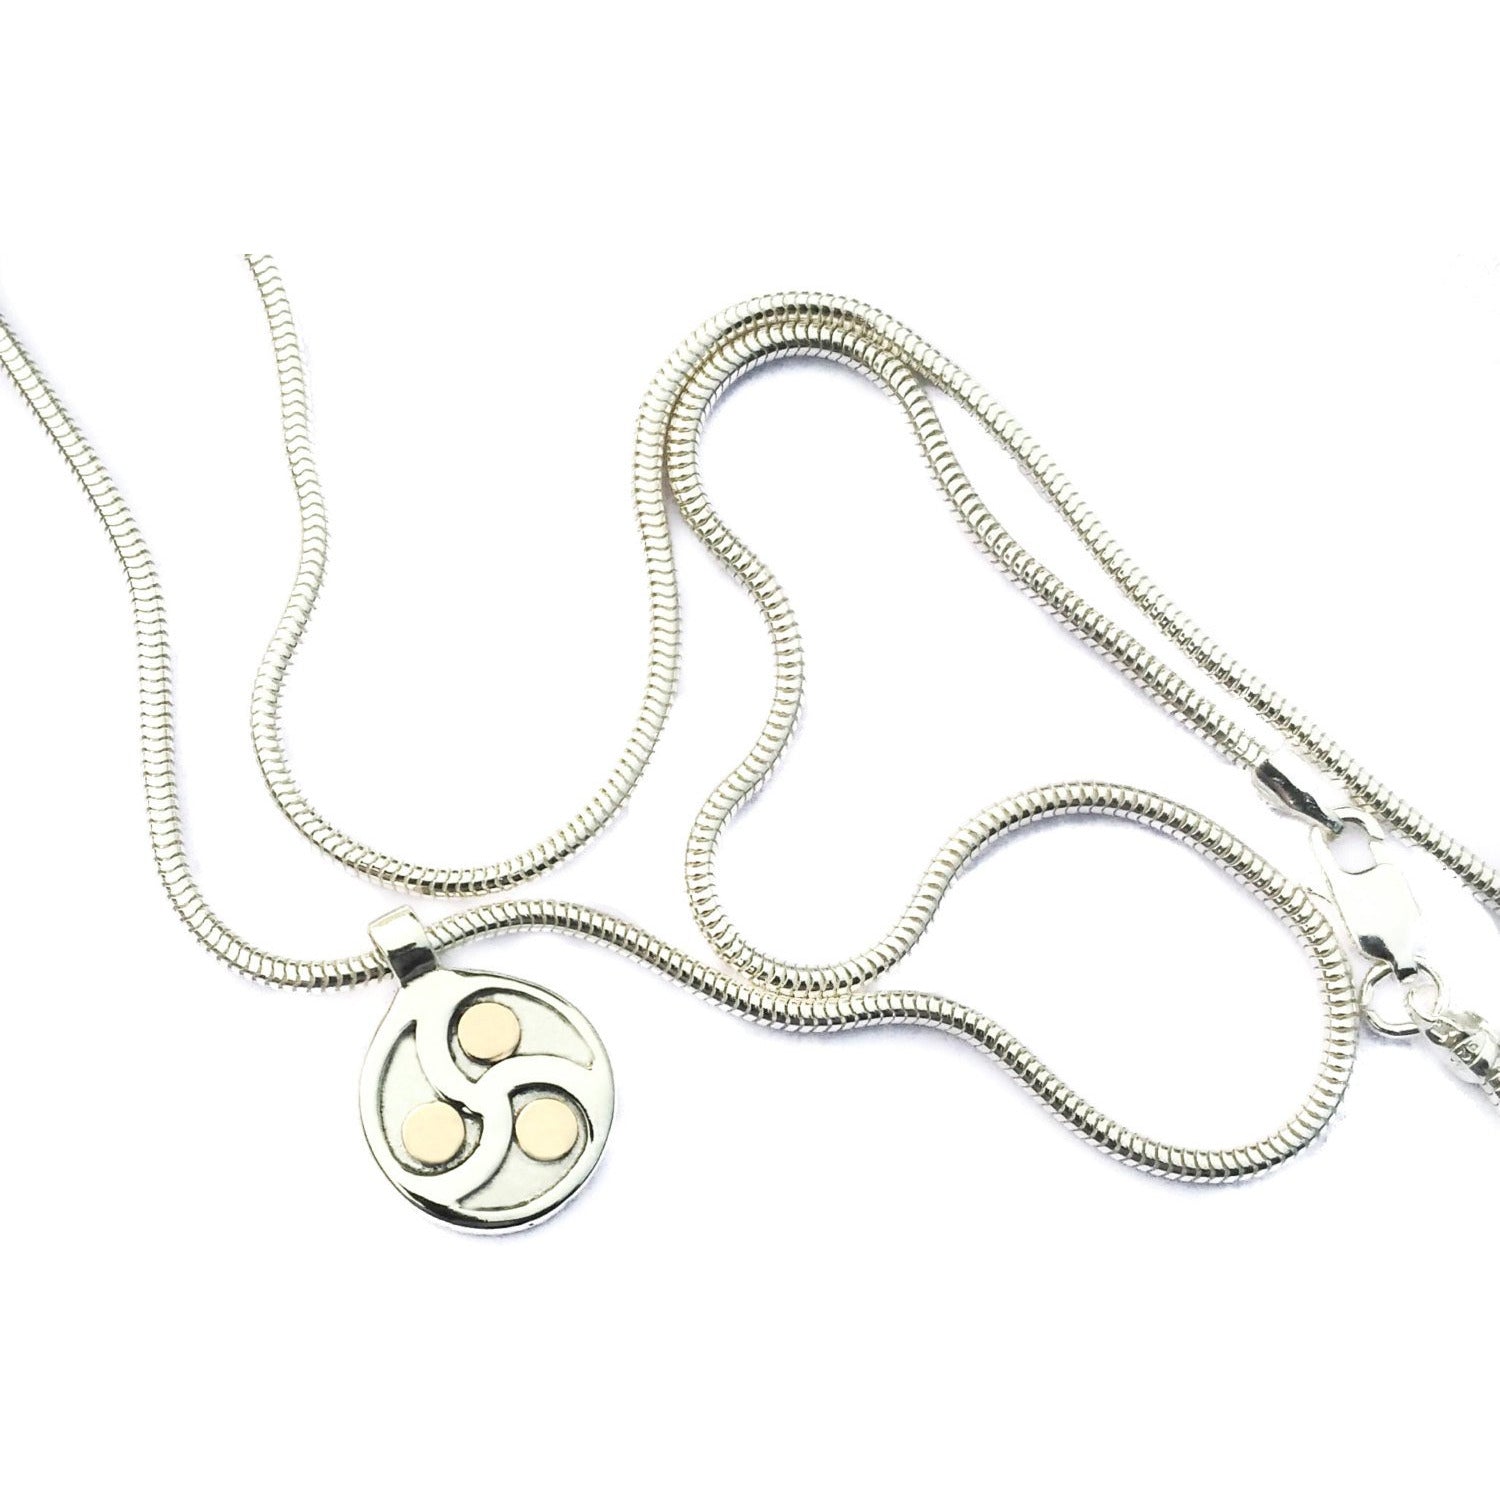 Discreet Sterling Silver and 9K Gold Triskele BDSM Day Collar: Artisan Pendant on a Light Snake Chain